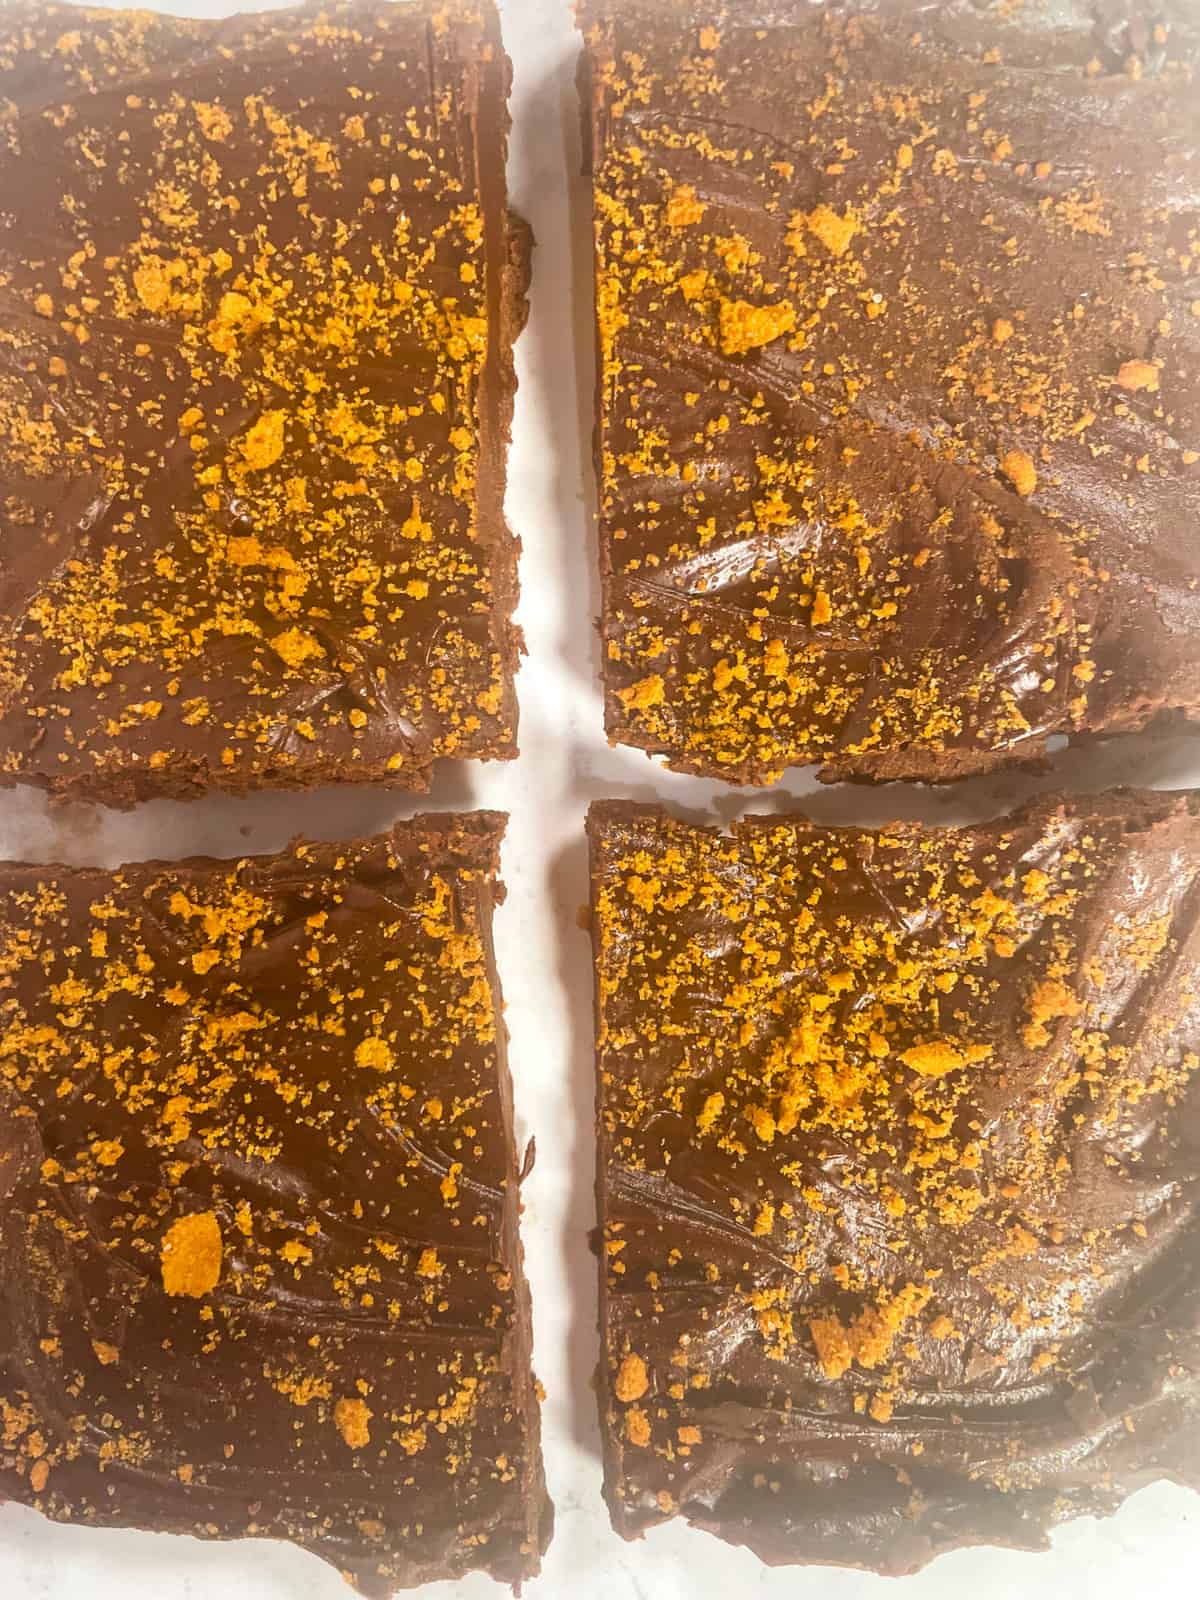 Another up-close shot of vegan chocolate peanut butter fudge. Four square slices.